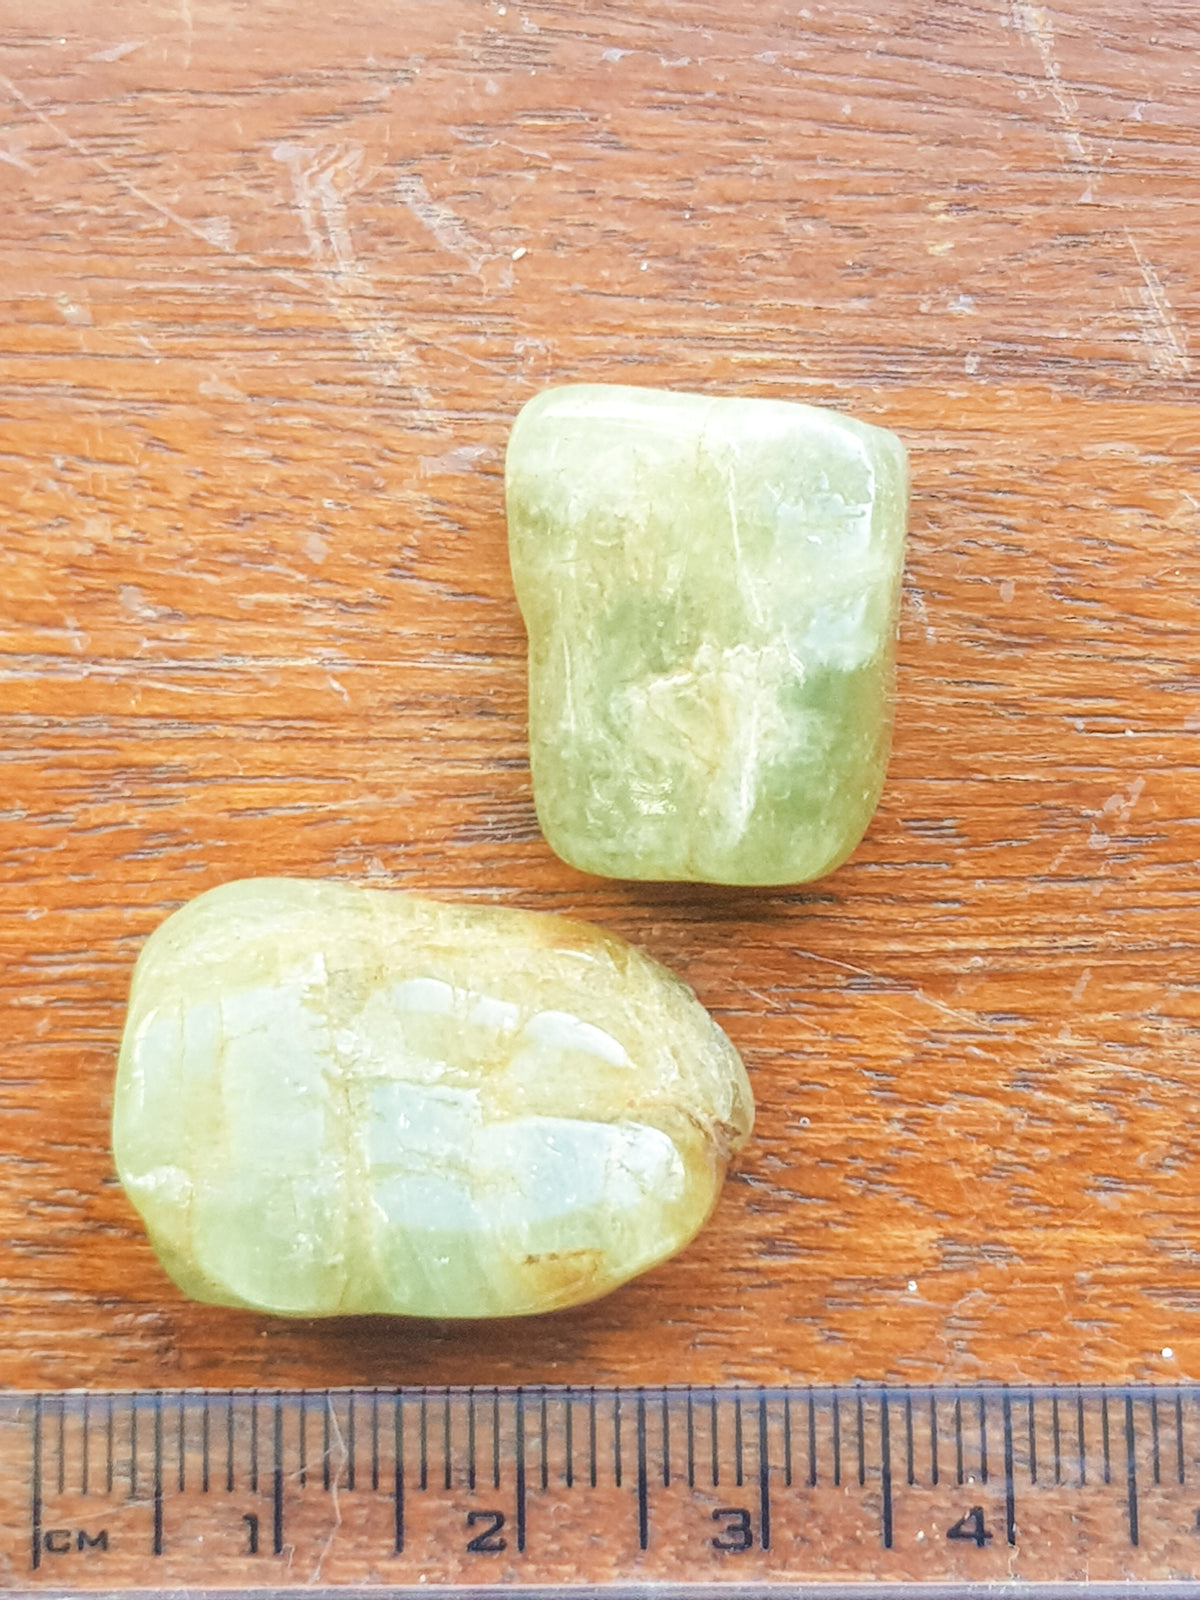 two green aquamarine tumblestones. they are next too a ruler for scale. they are about 3cm each